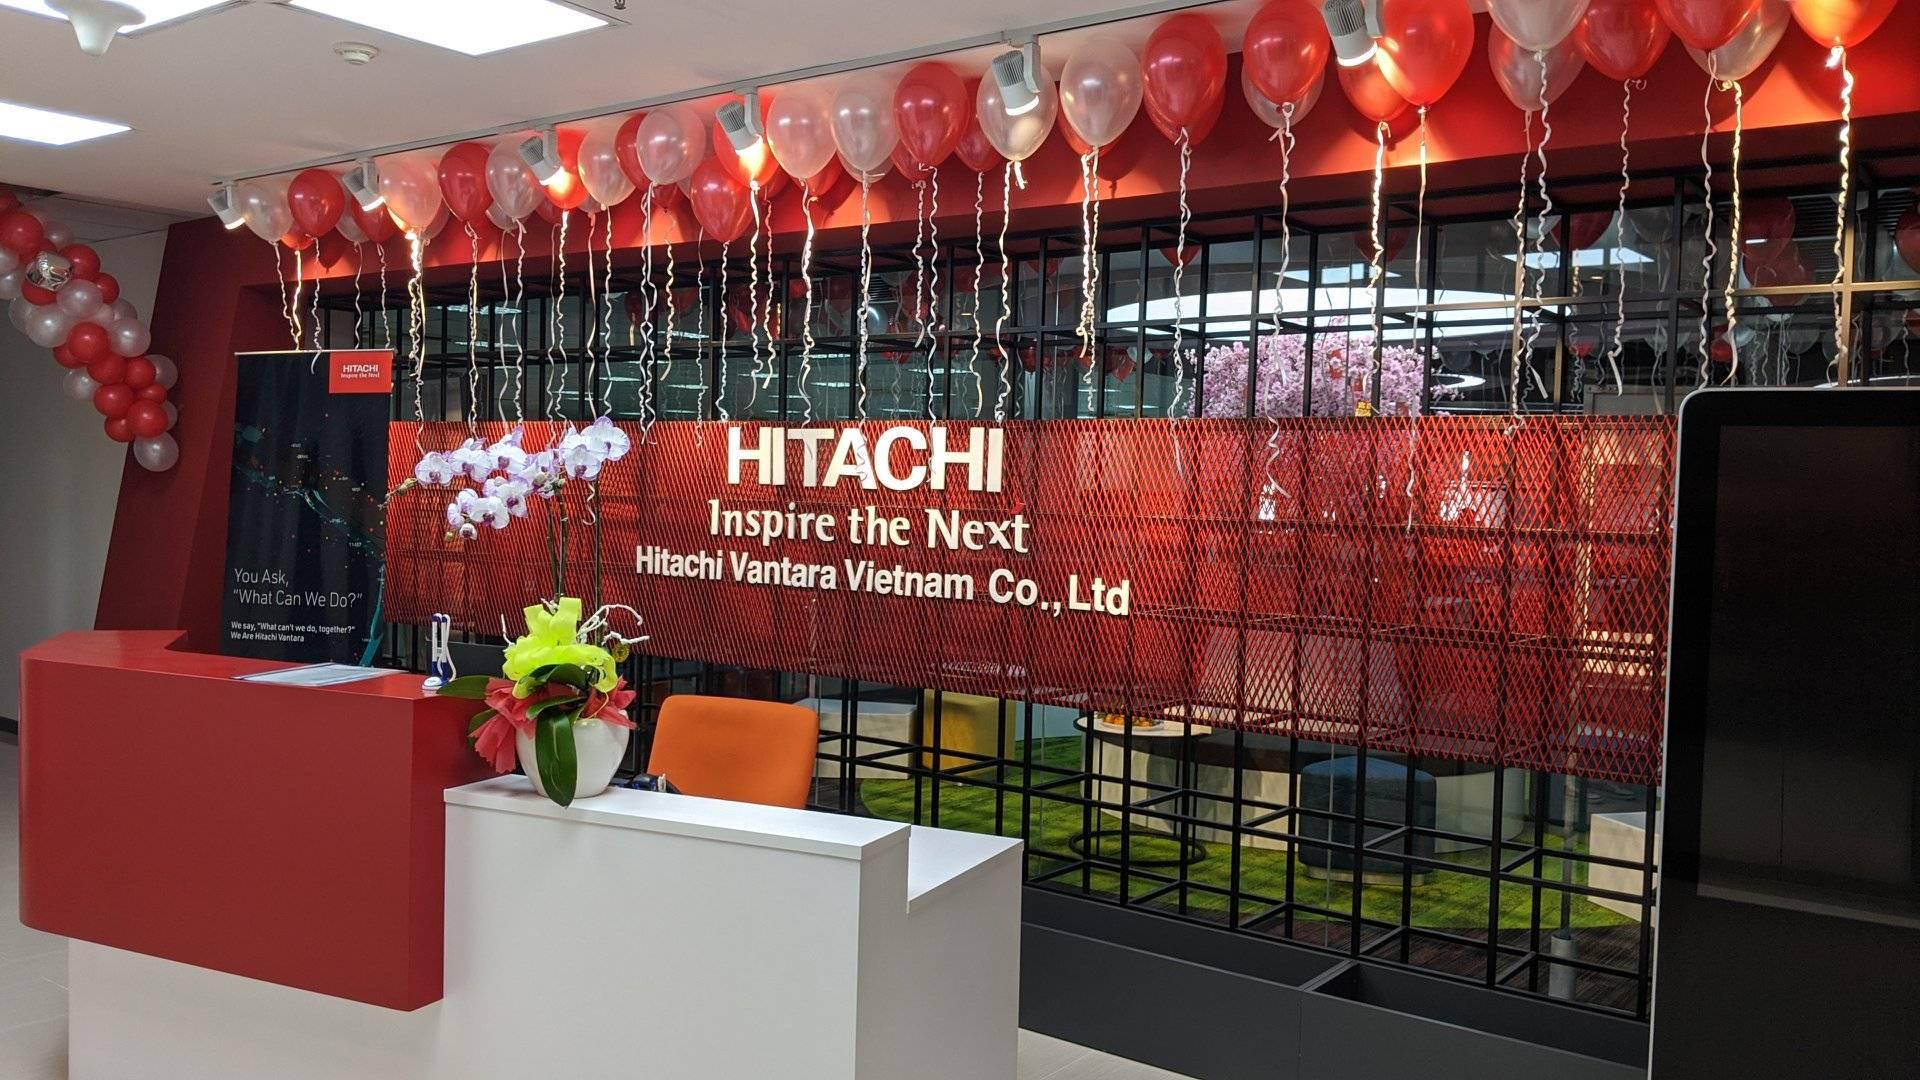 Latest Hitachi Digital Services employment/hiring with high salary & attractive benefits